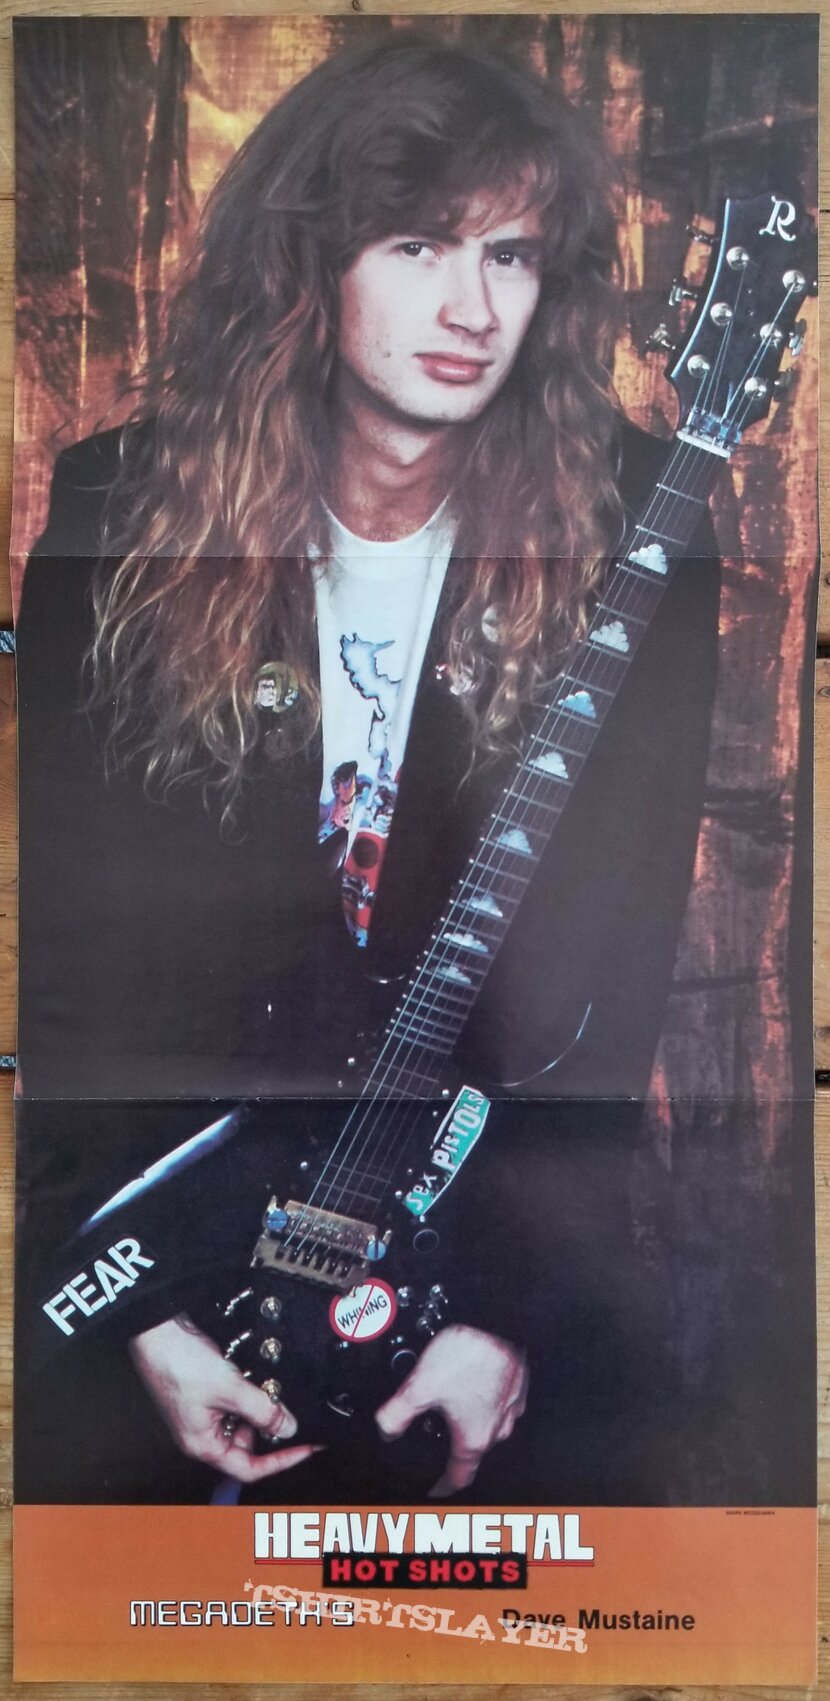 Megadeth &#039; Peace Sells...But Who&#039;s Buying? &#039; Original Vinyl LP + Promotional Posters + Ads 